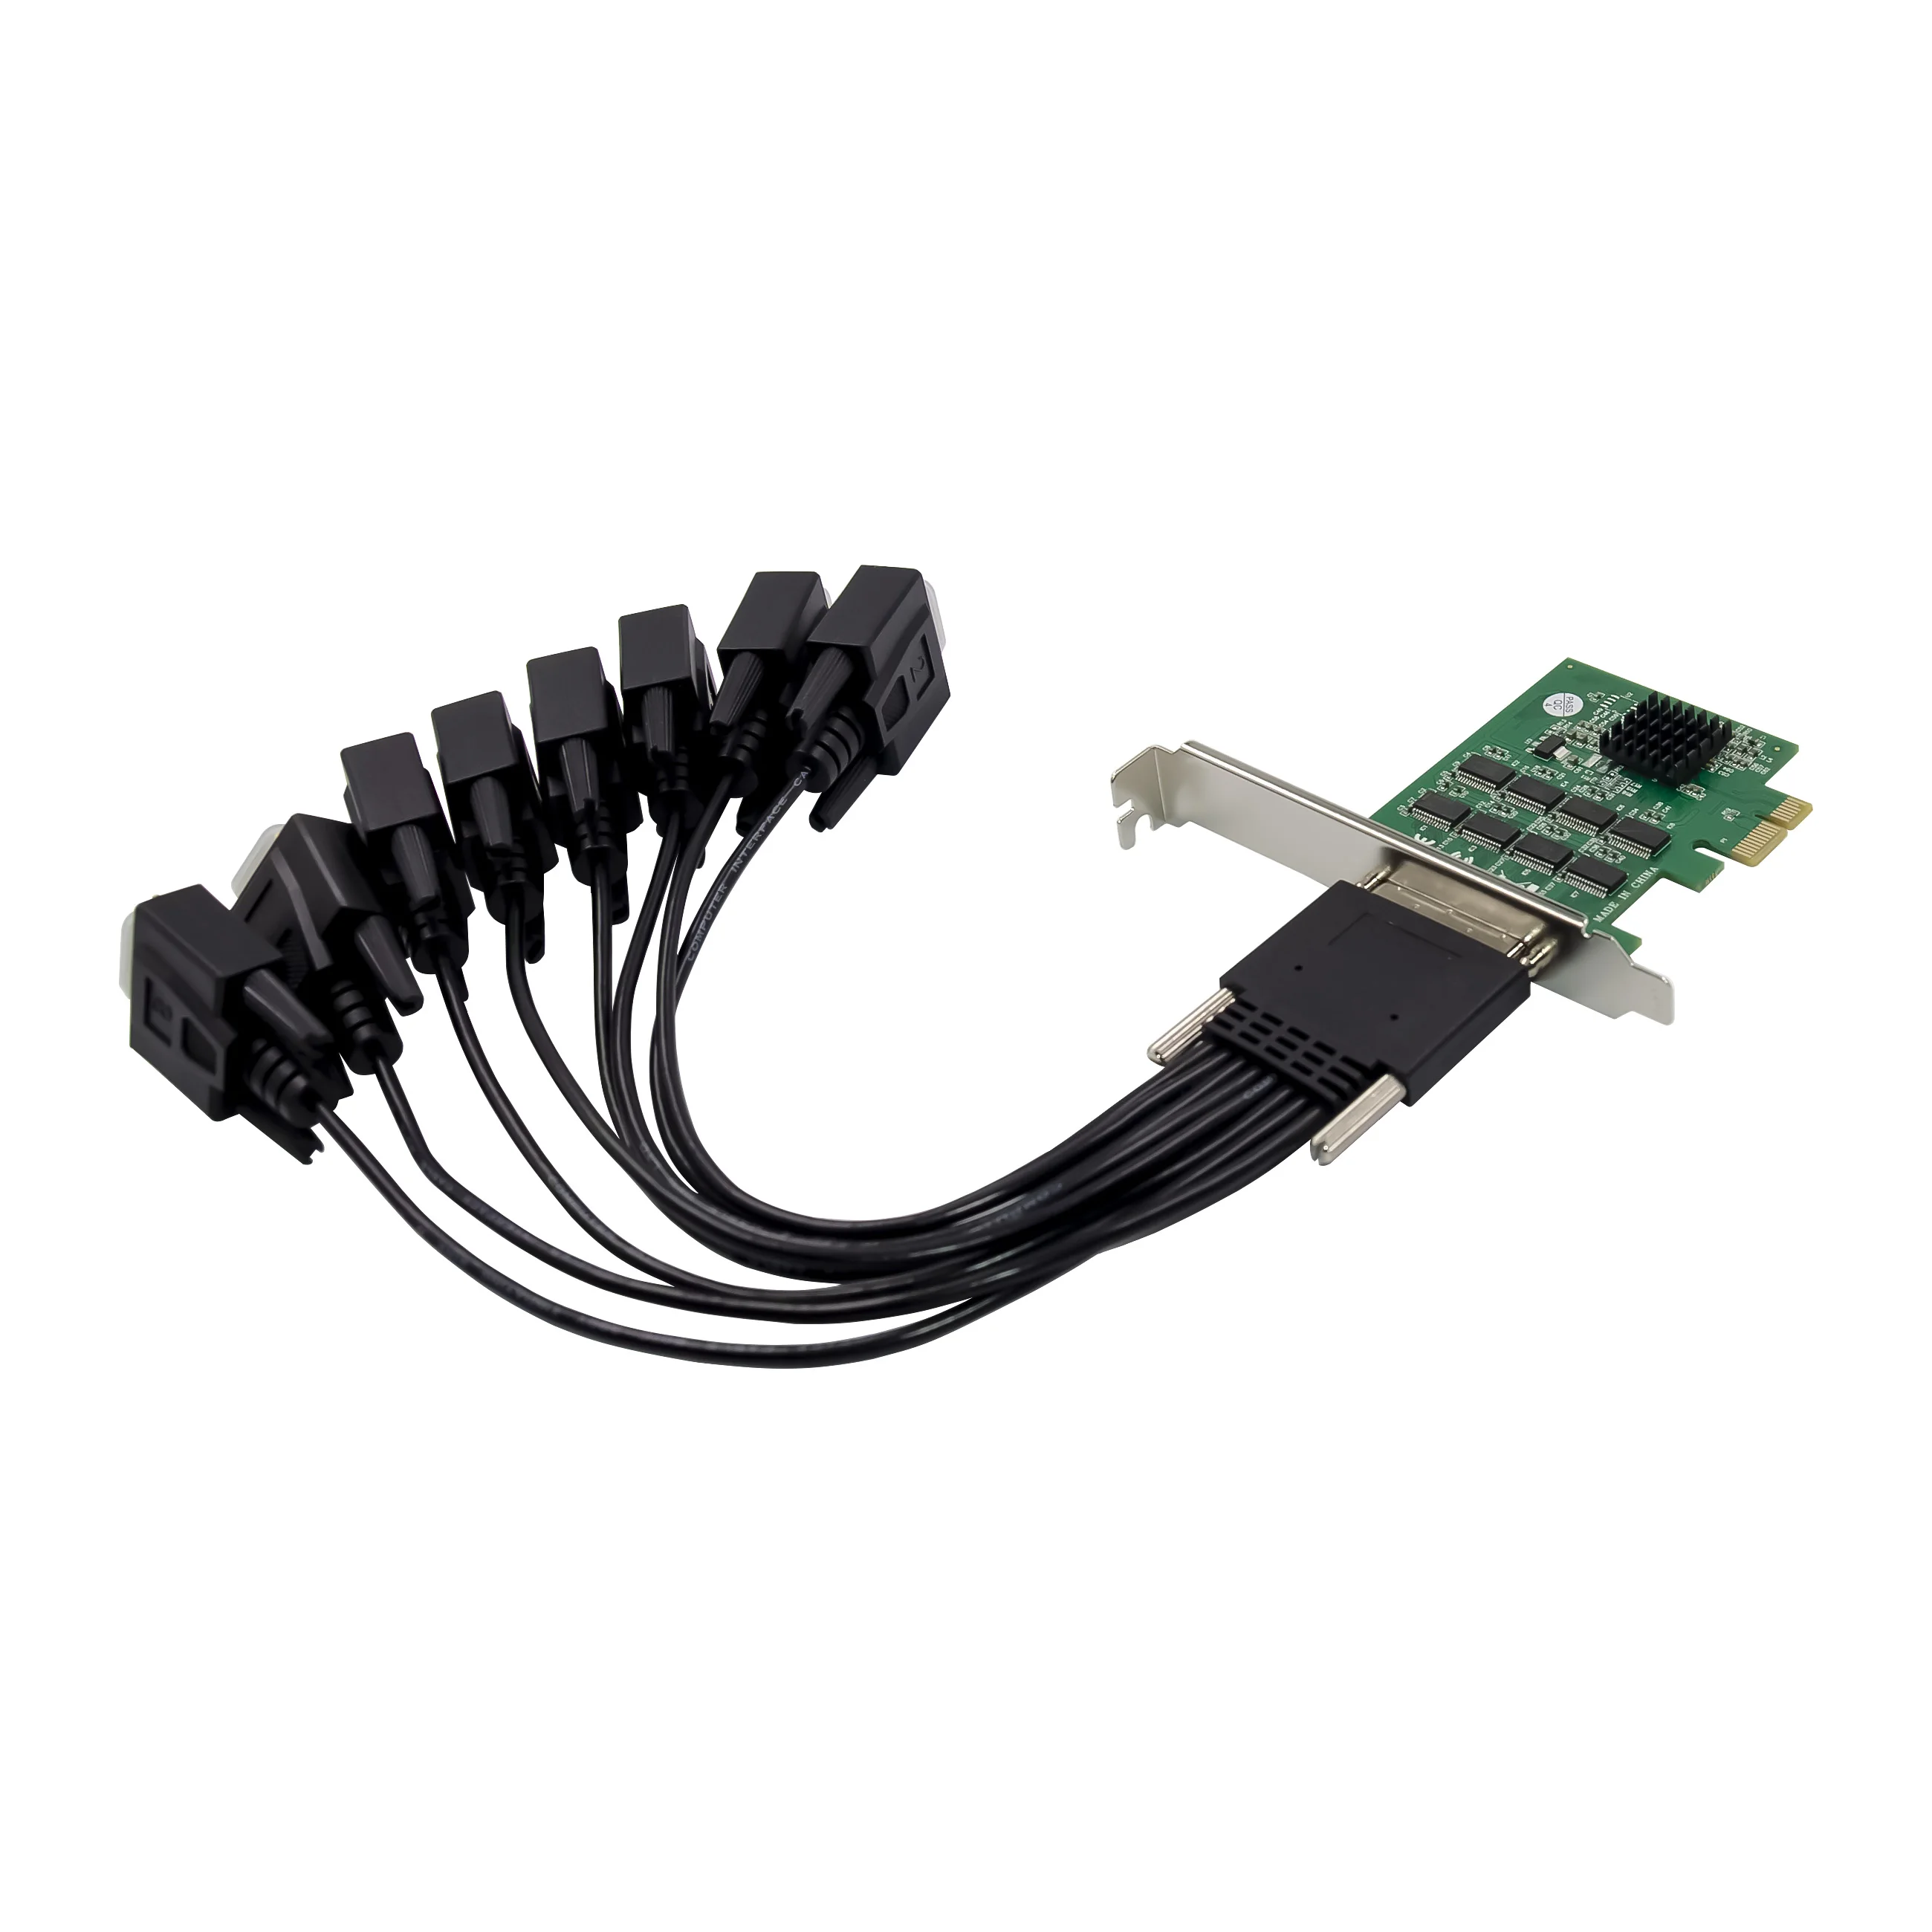 VX-012 2-port Multiport Serial Adapter ExpressCard x DB-9 Male RS-232 